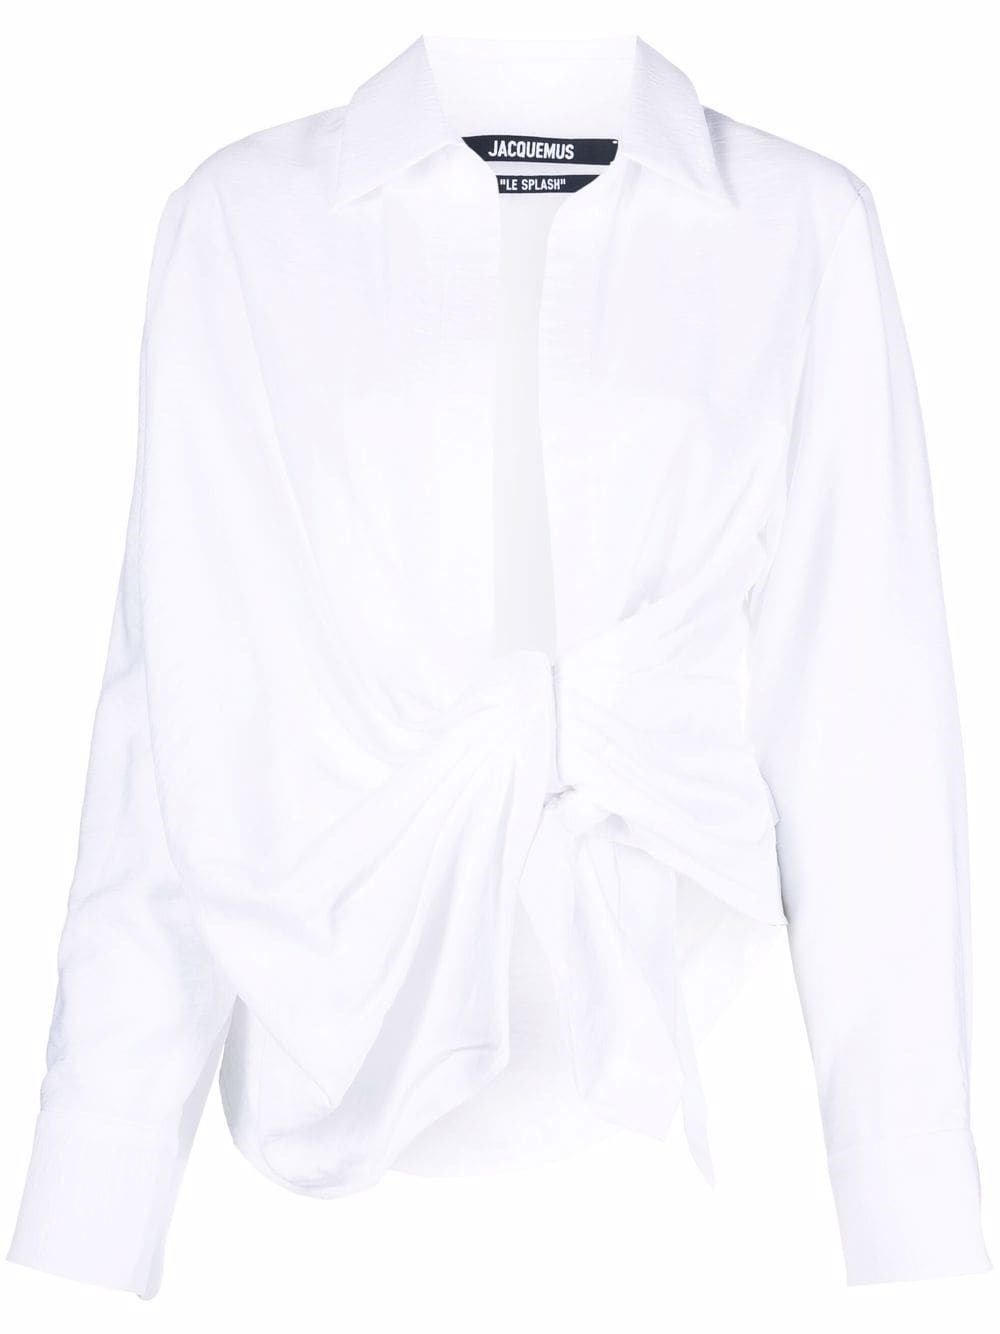 Jacquemus Bahia Blouse With Knot In White